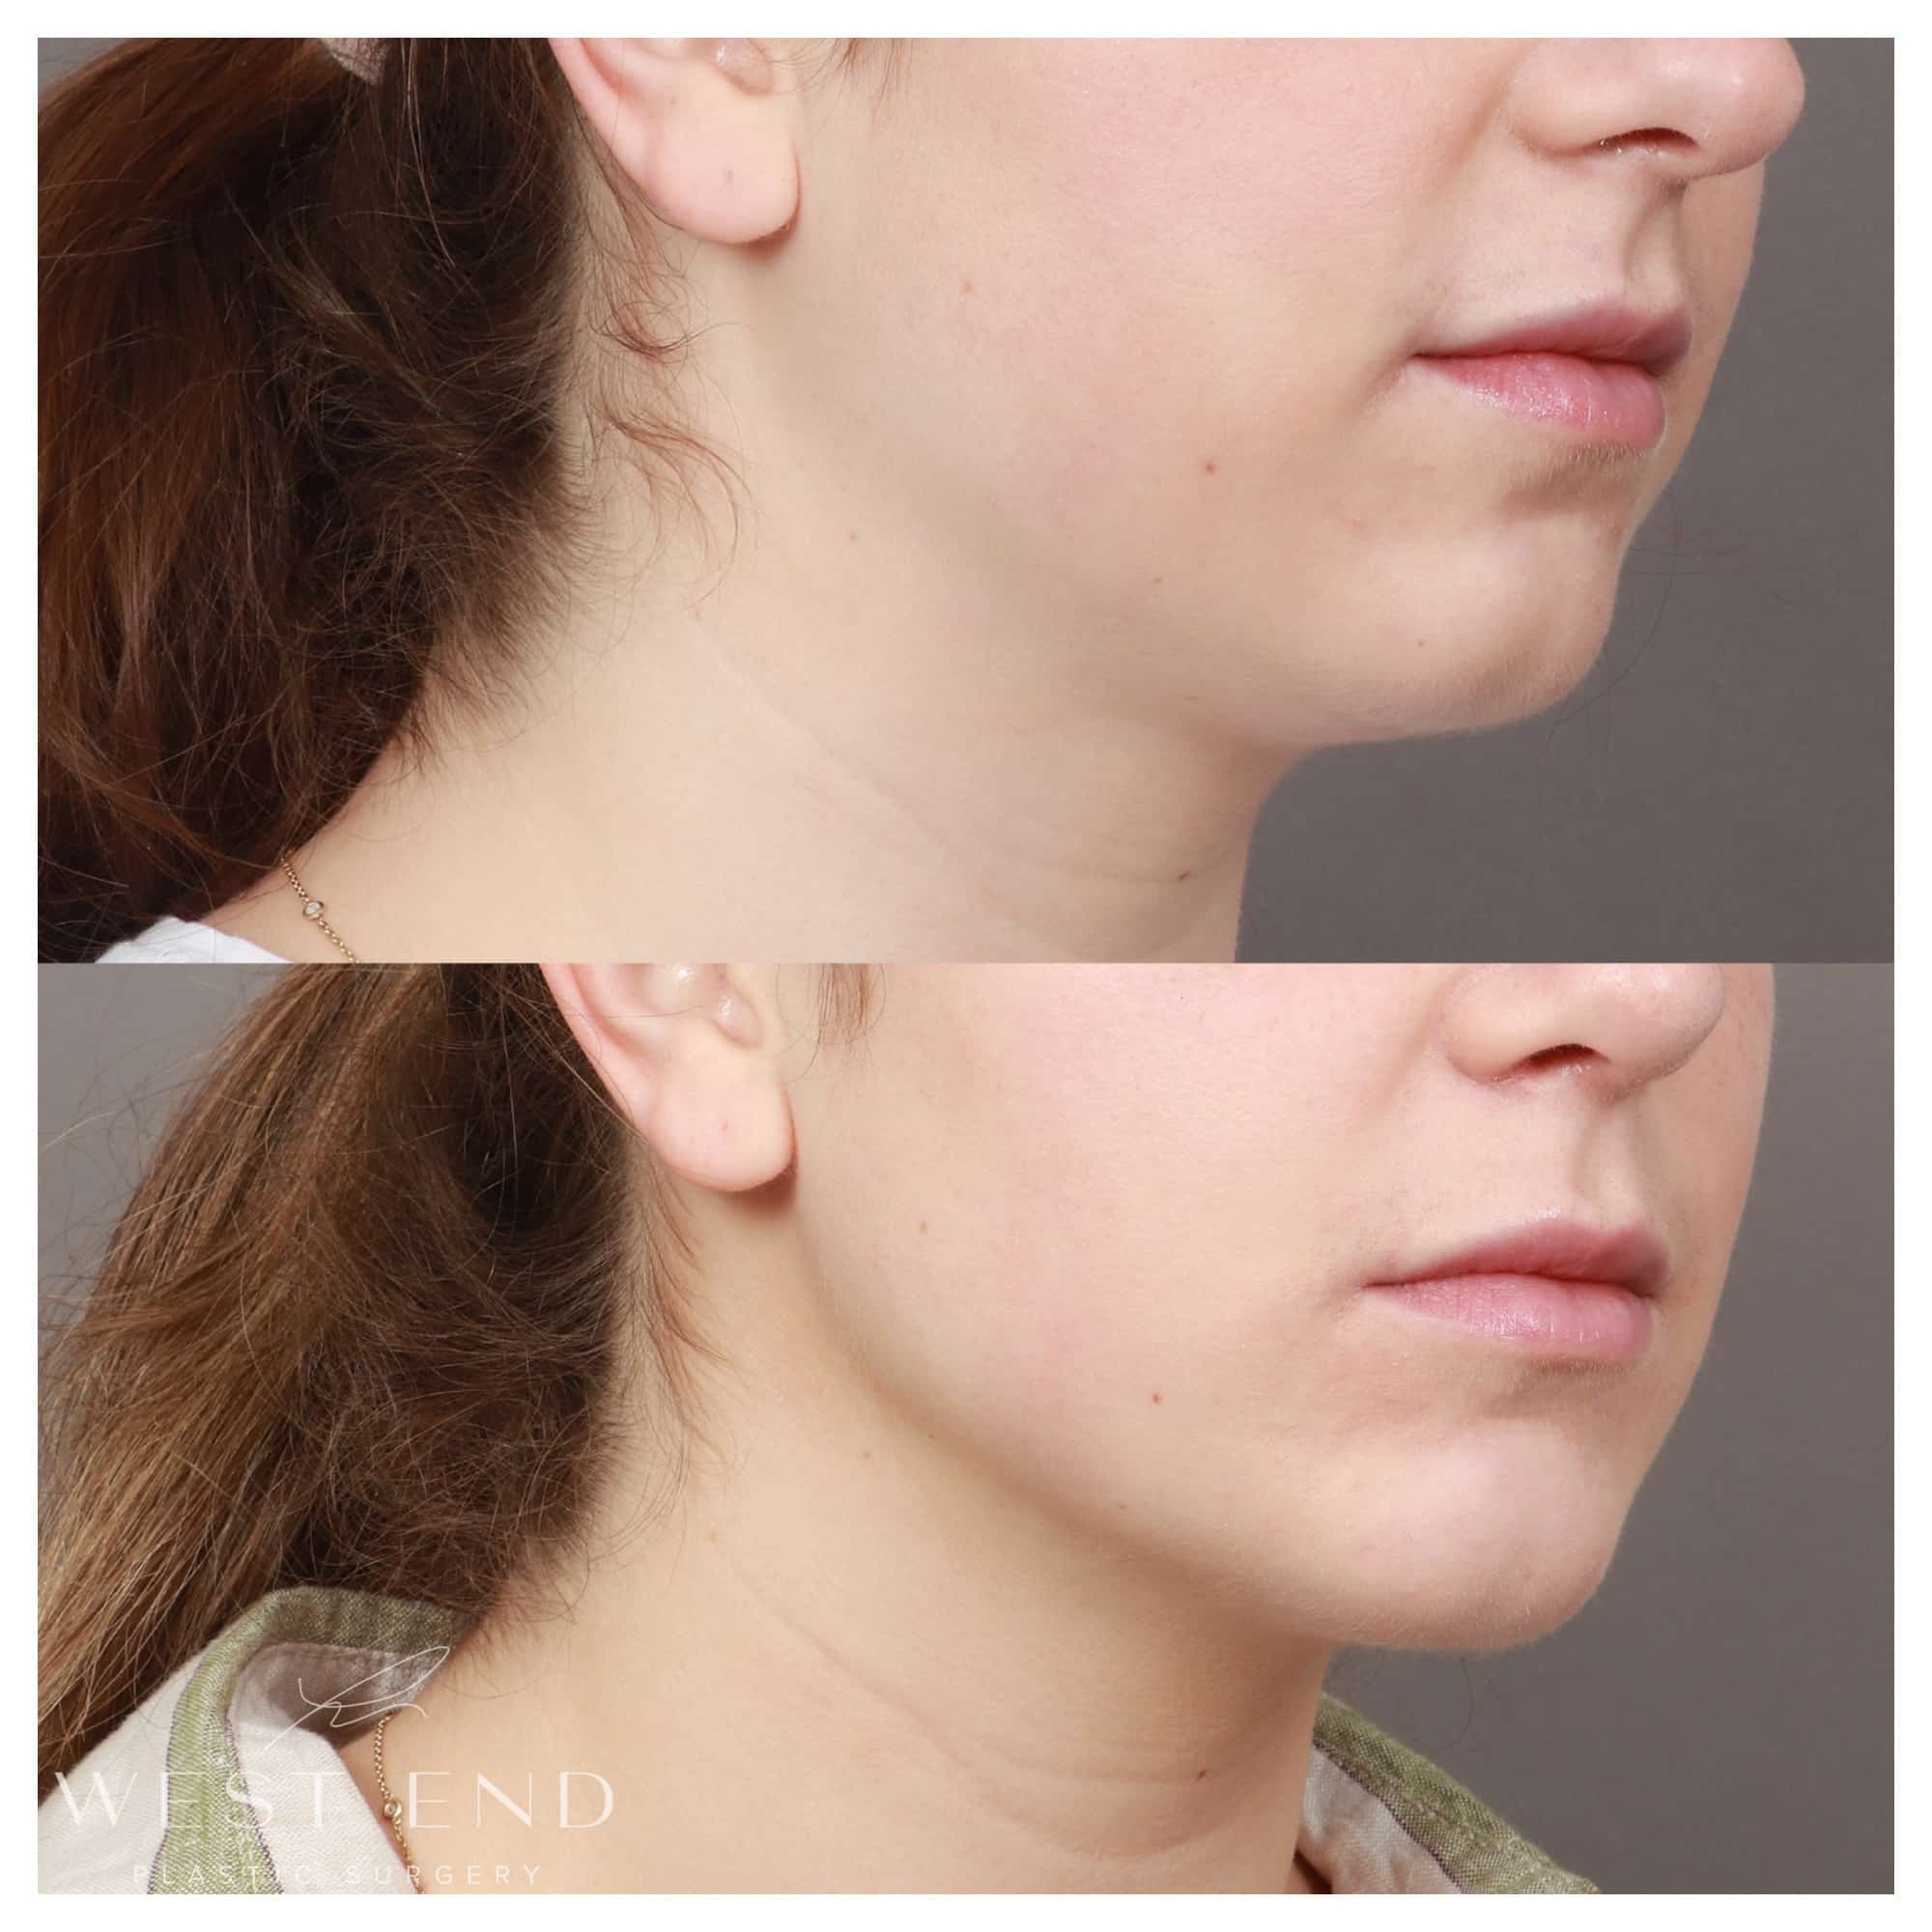 Chin Implant with Liposuction of the lower face and neck (4.5 Months Post-op)